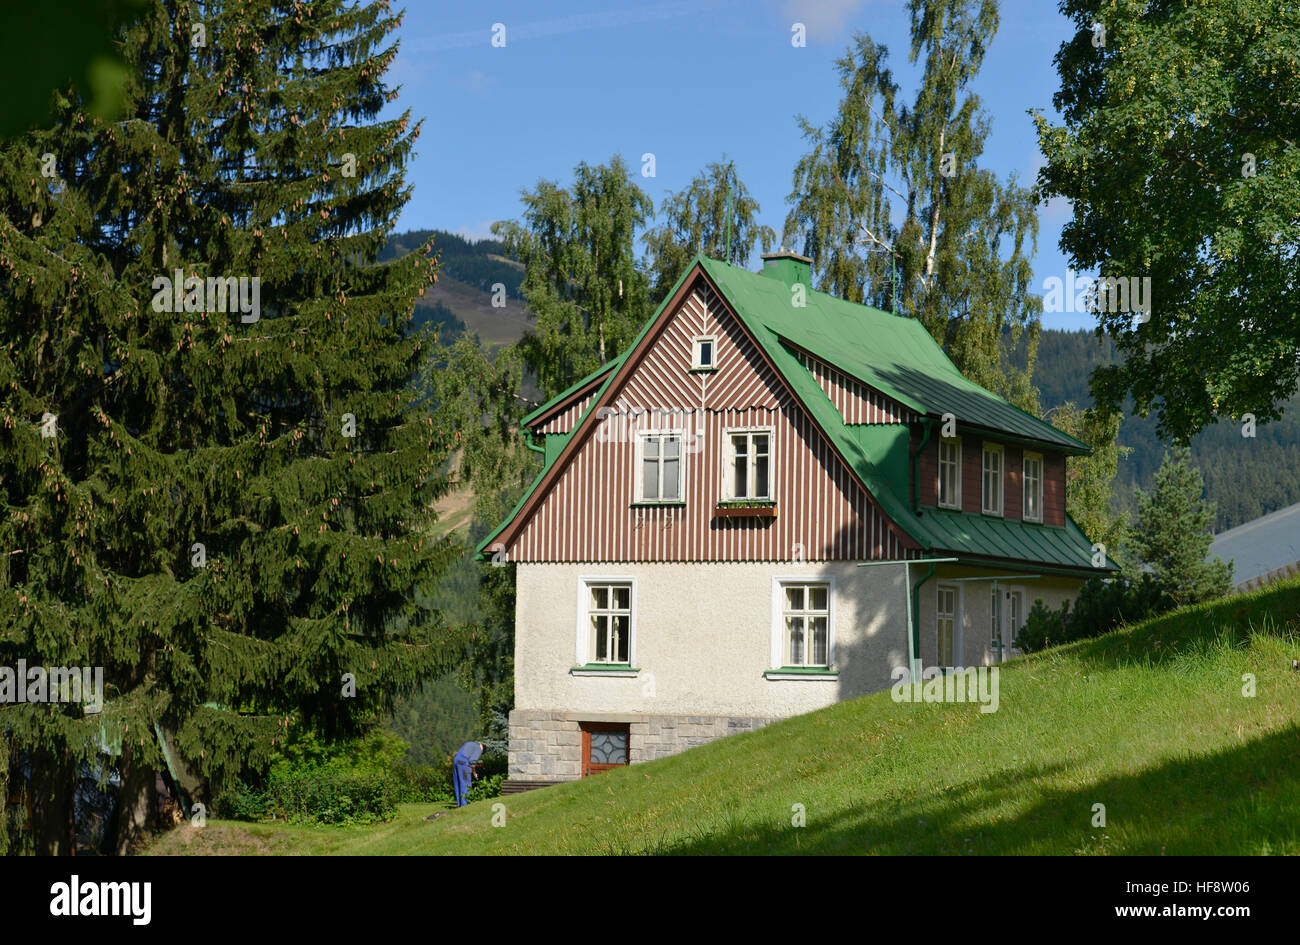 Wohnhaus, Spindlersmuehle, Tschechien, Dwelling house, wooden spindle maker's mill, Czechia Stock Photo